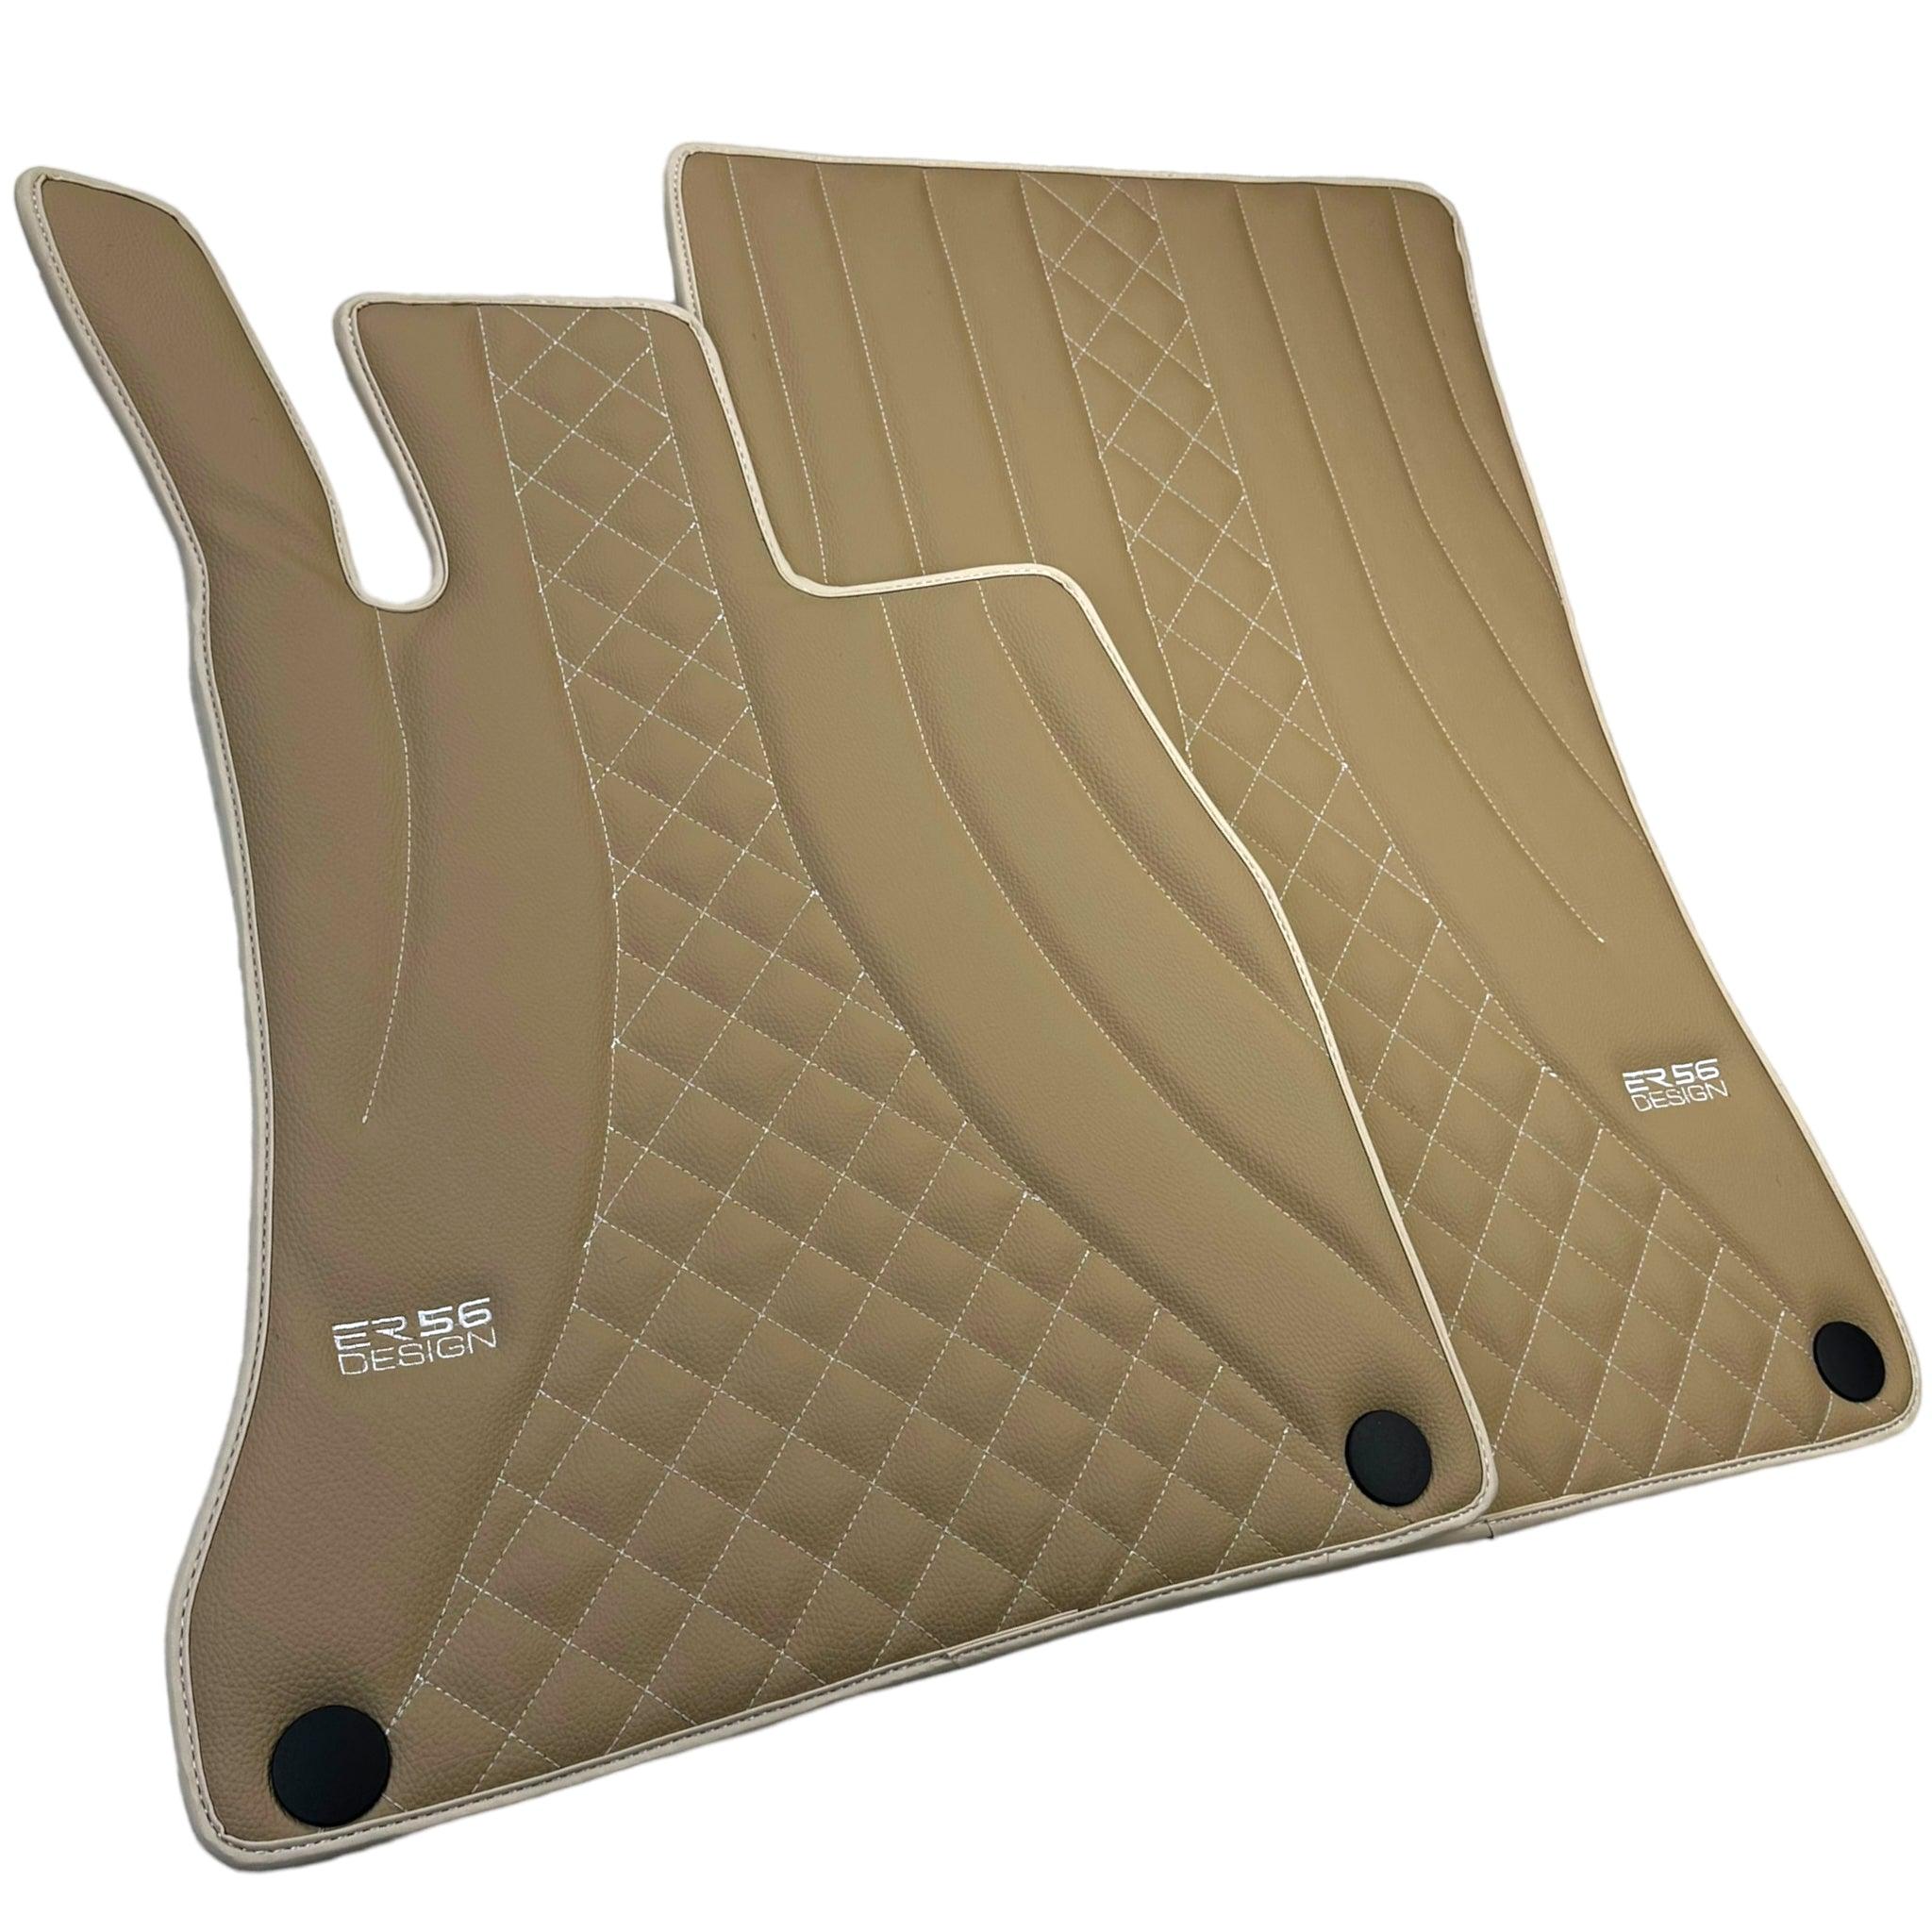 Beige Leather Floor Mats For Mercedes Benz C-Class CL203 Coupe (2000-2008)